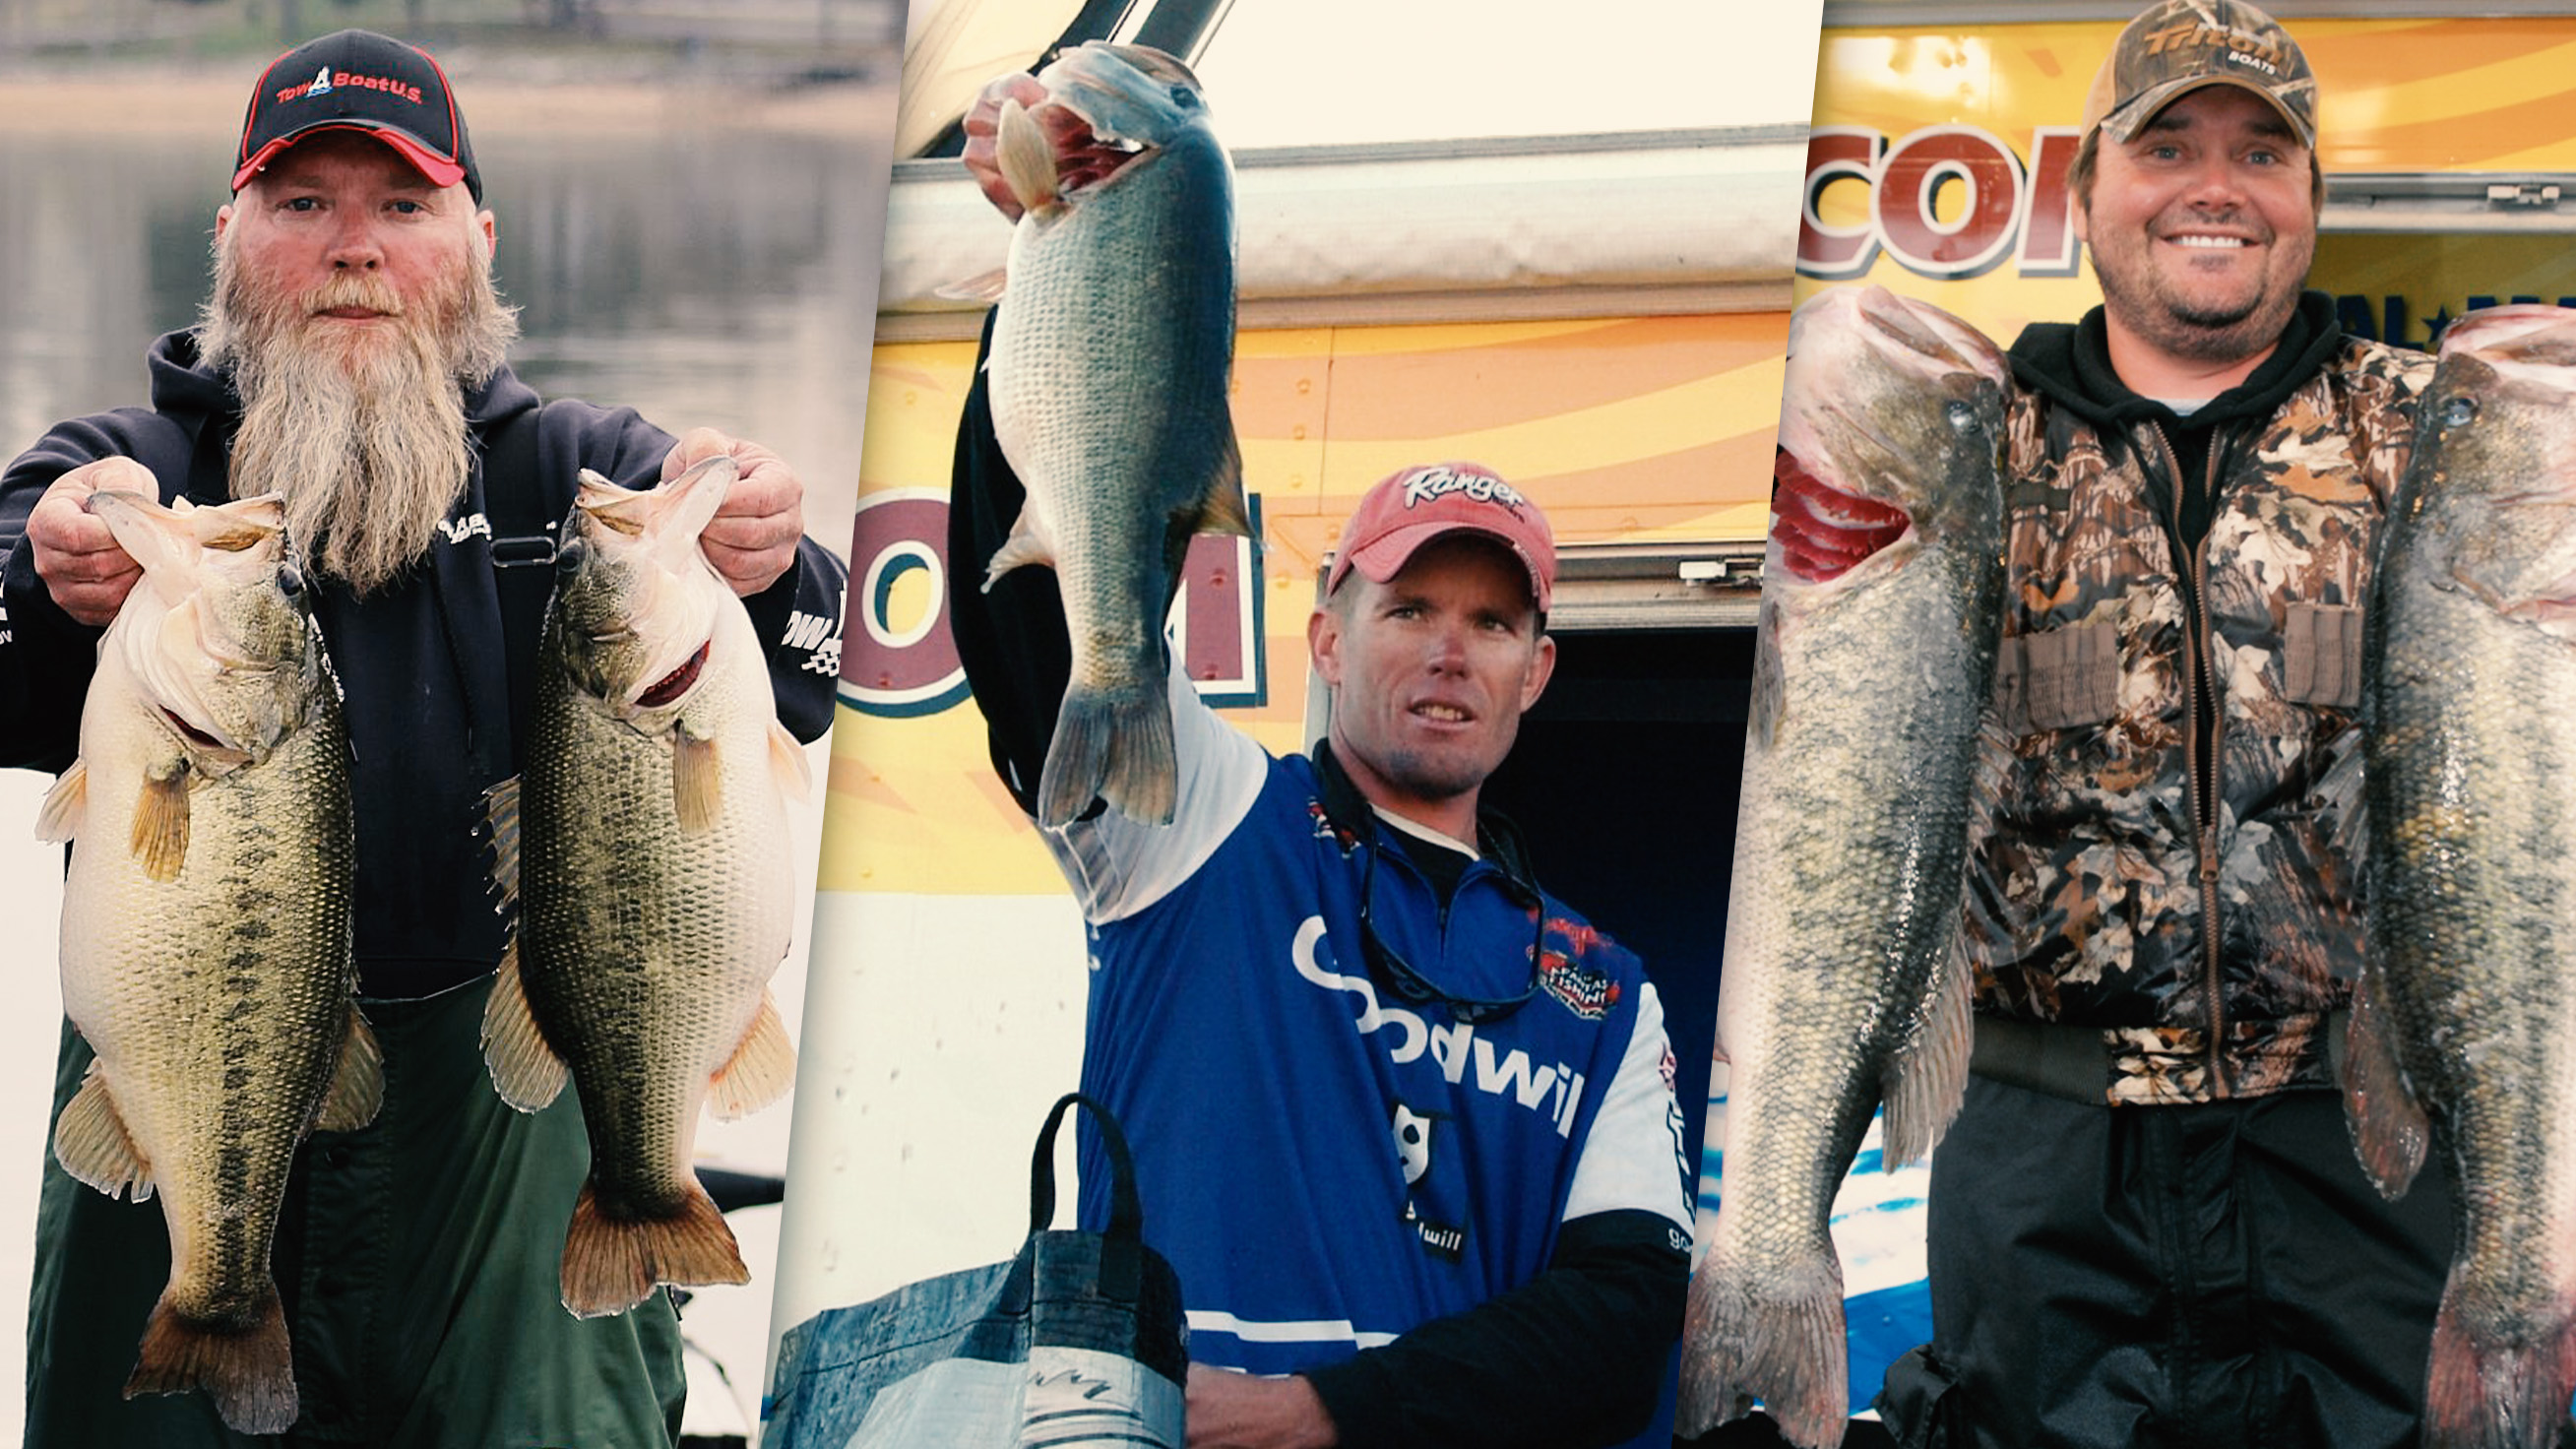 The Top 5 Limits of All Time - Major League Fishing